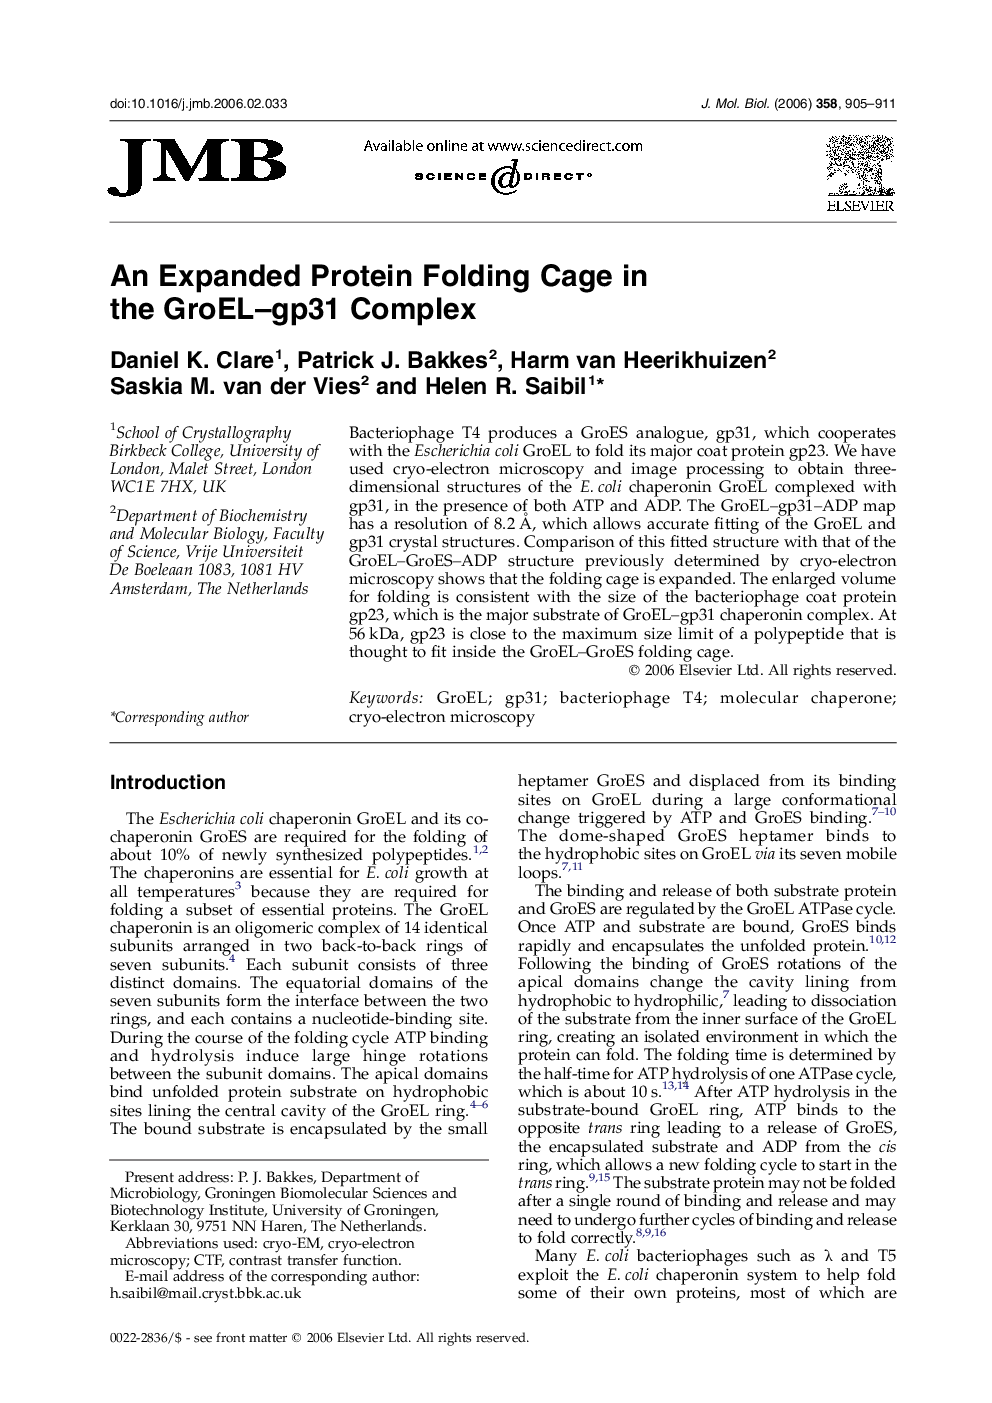 An Expanded Protein Folding Cage in the GroEL–gp31 Complex